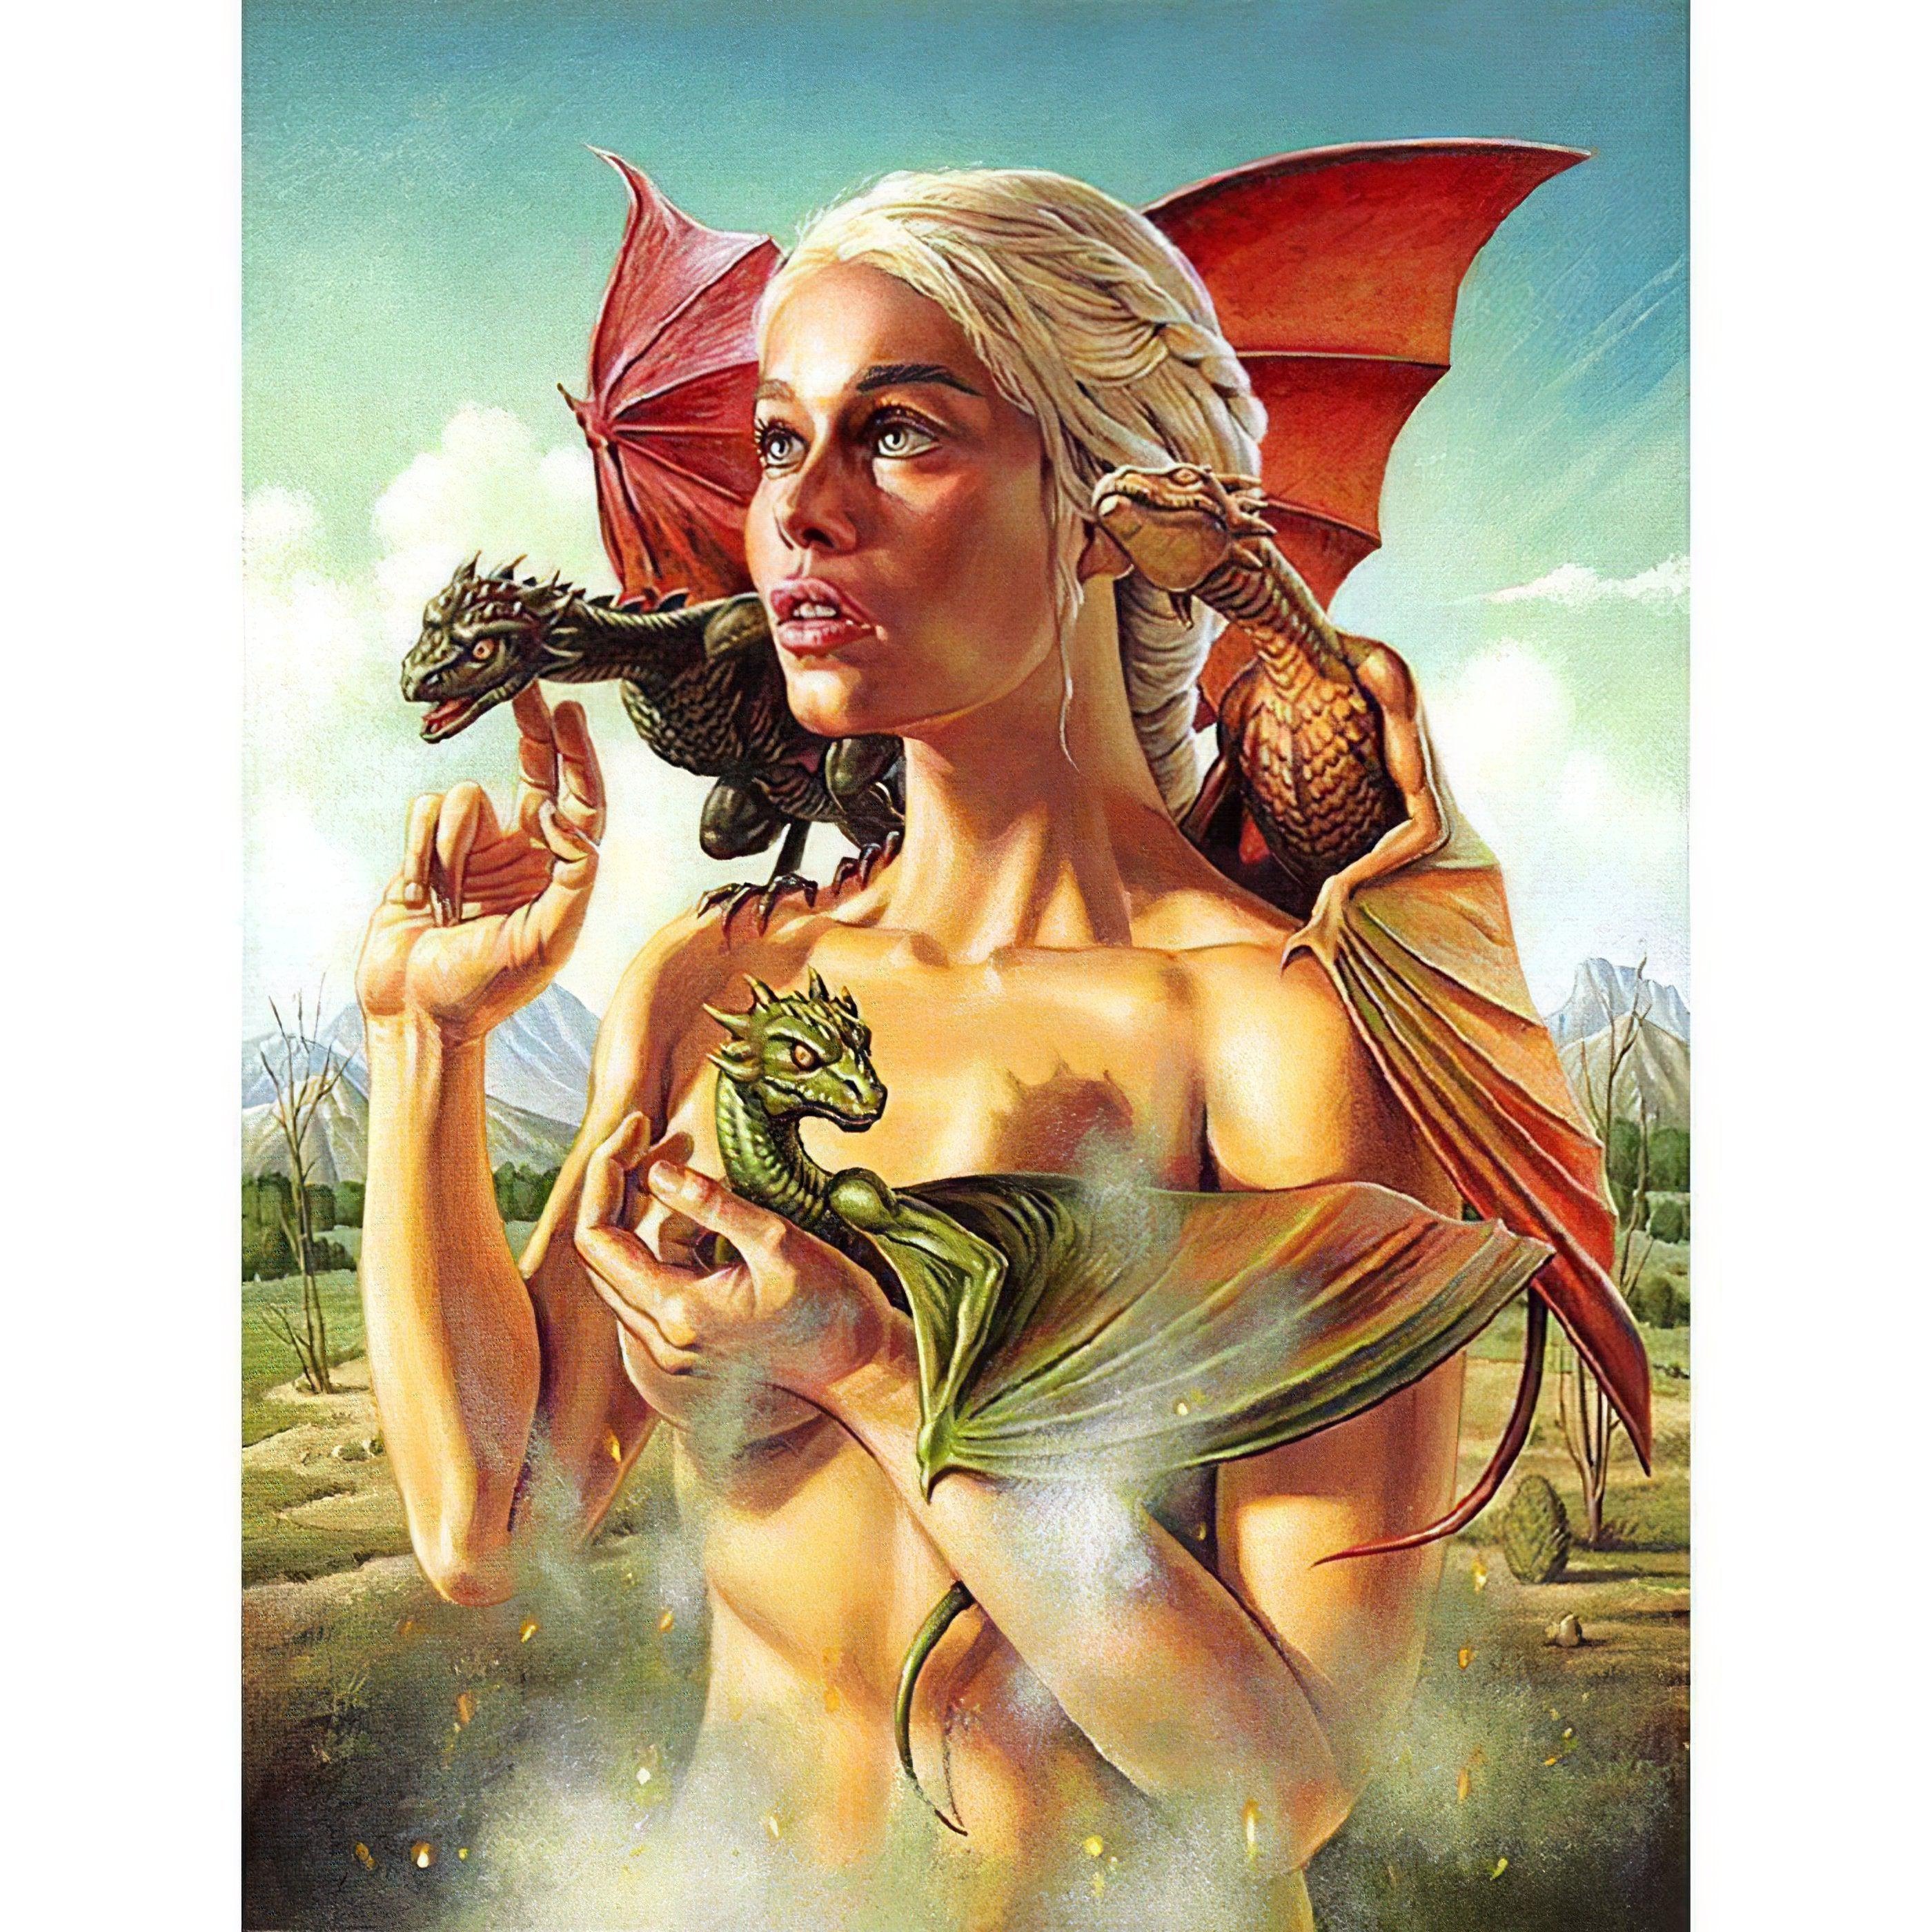 Embrace the power of Daenerys in Game of Thrones art.Game Of Thrones Daenerys Targaryen - Diamondartlove